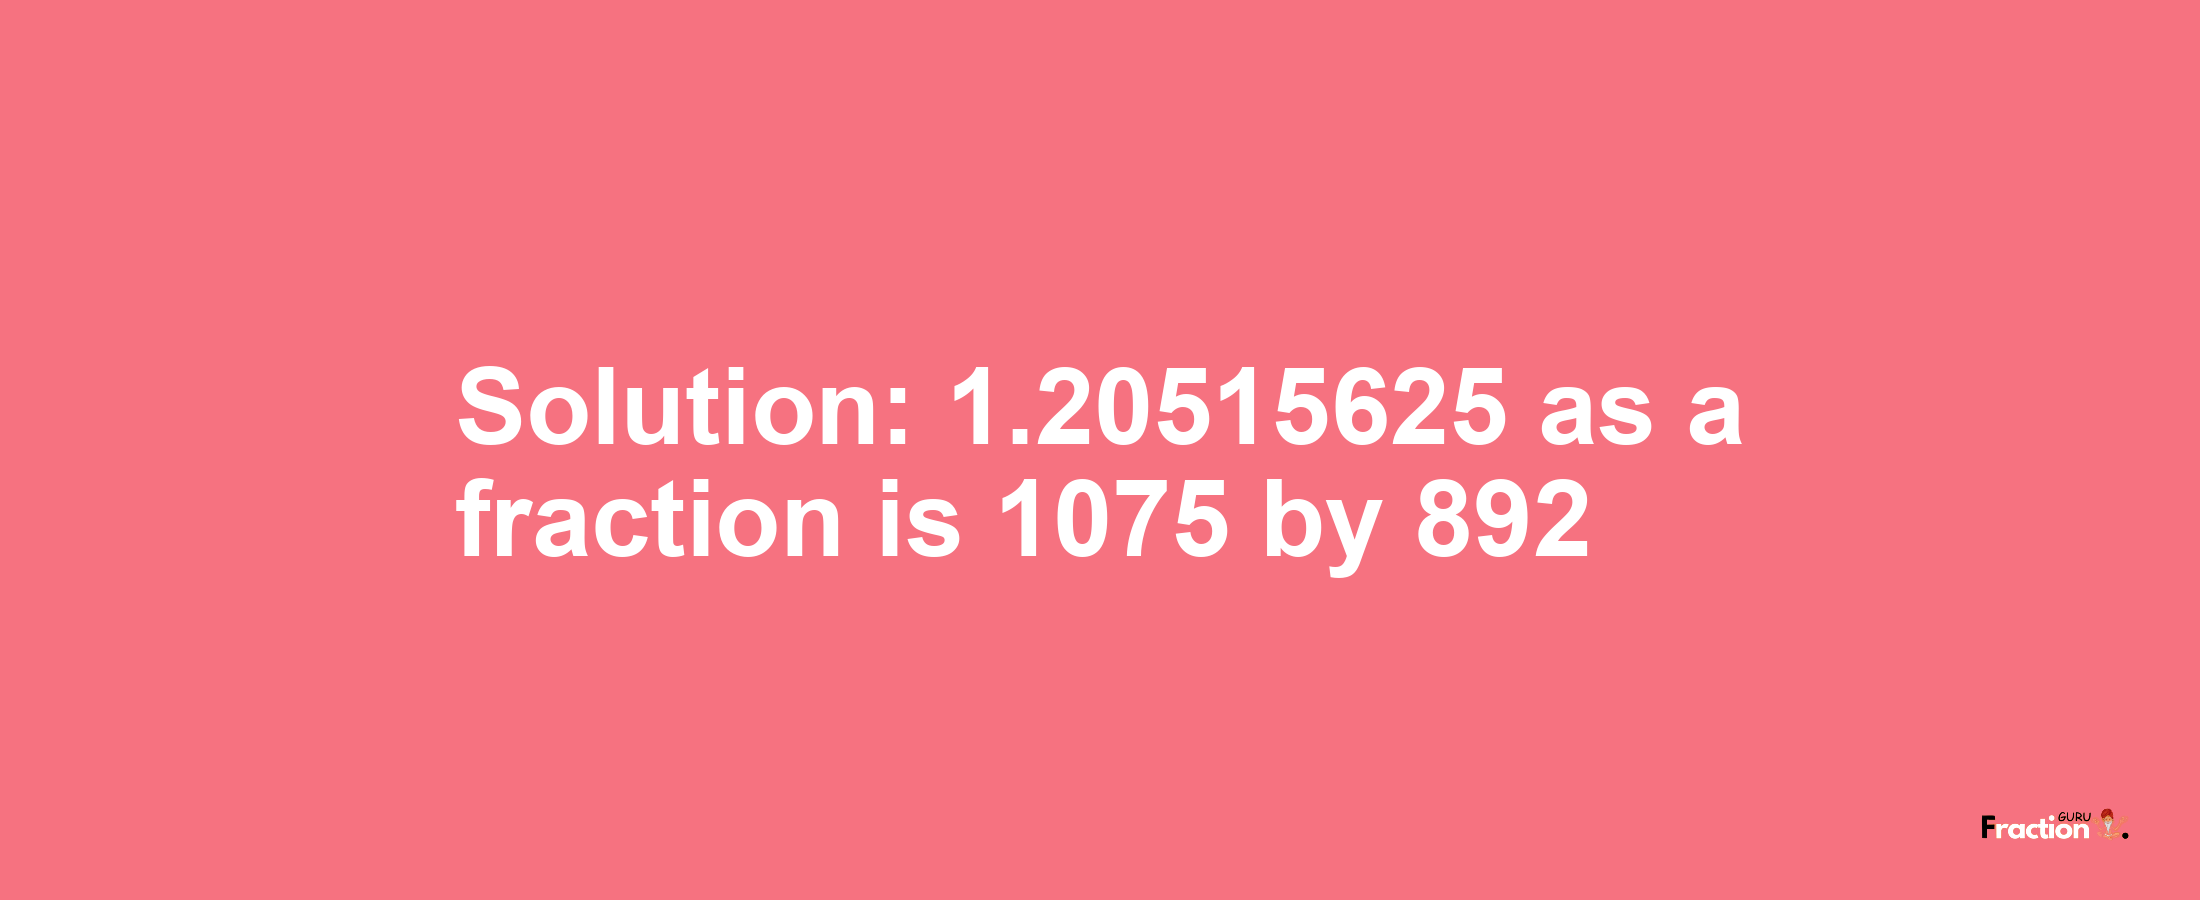 Solution:1.20515625 as a fraction is 1075/892